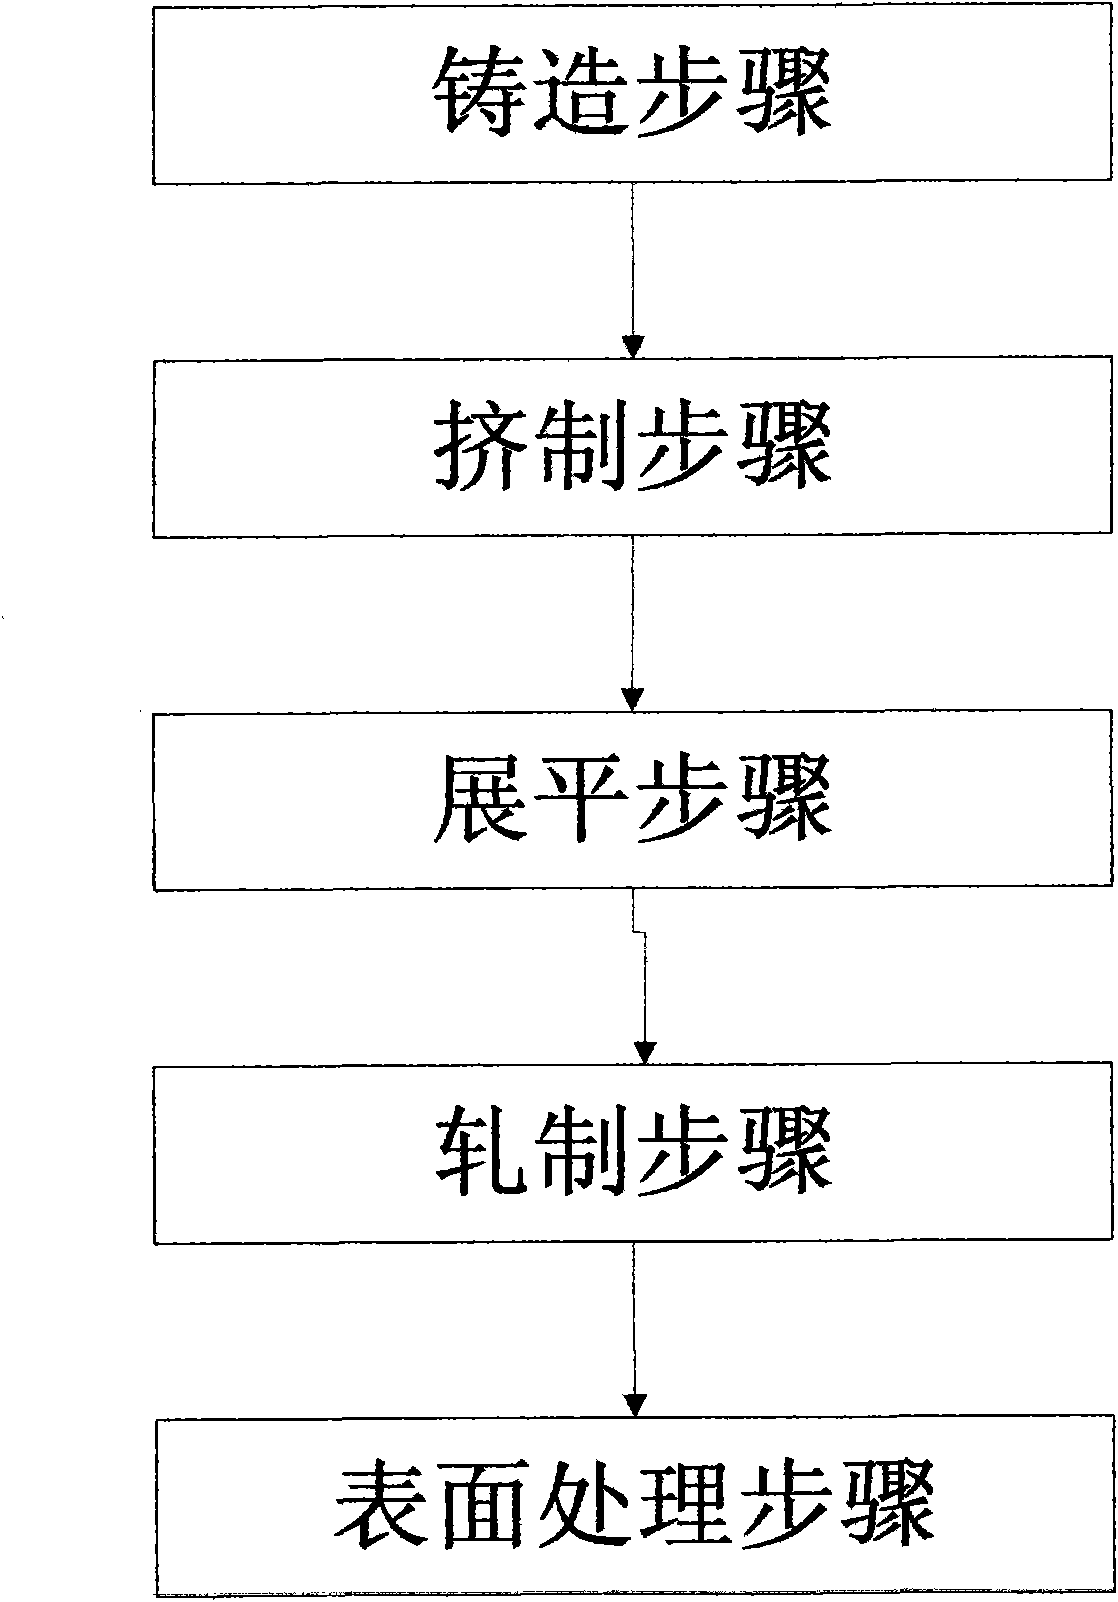 Method for producing magnesium alloy sheet